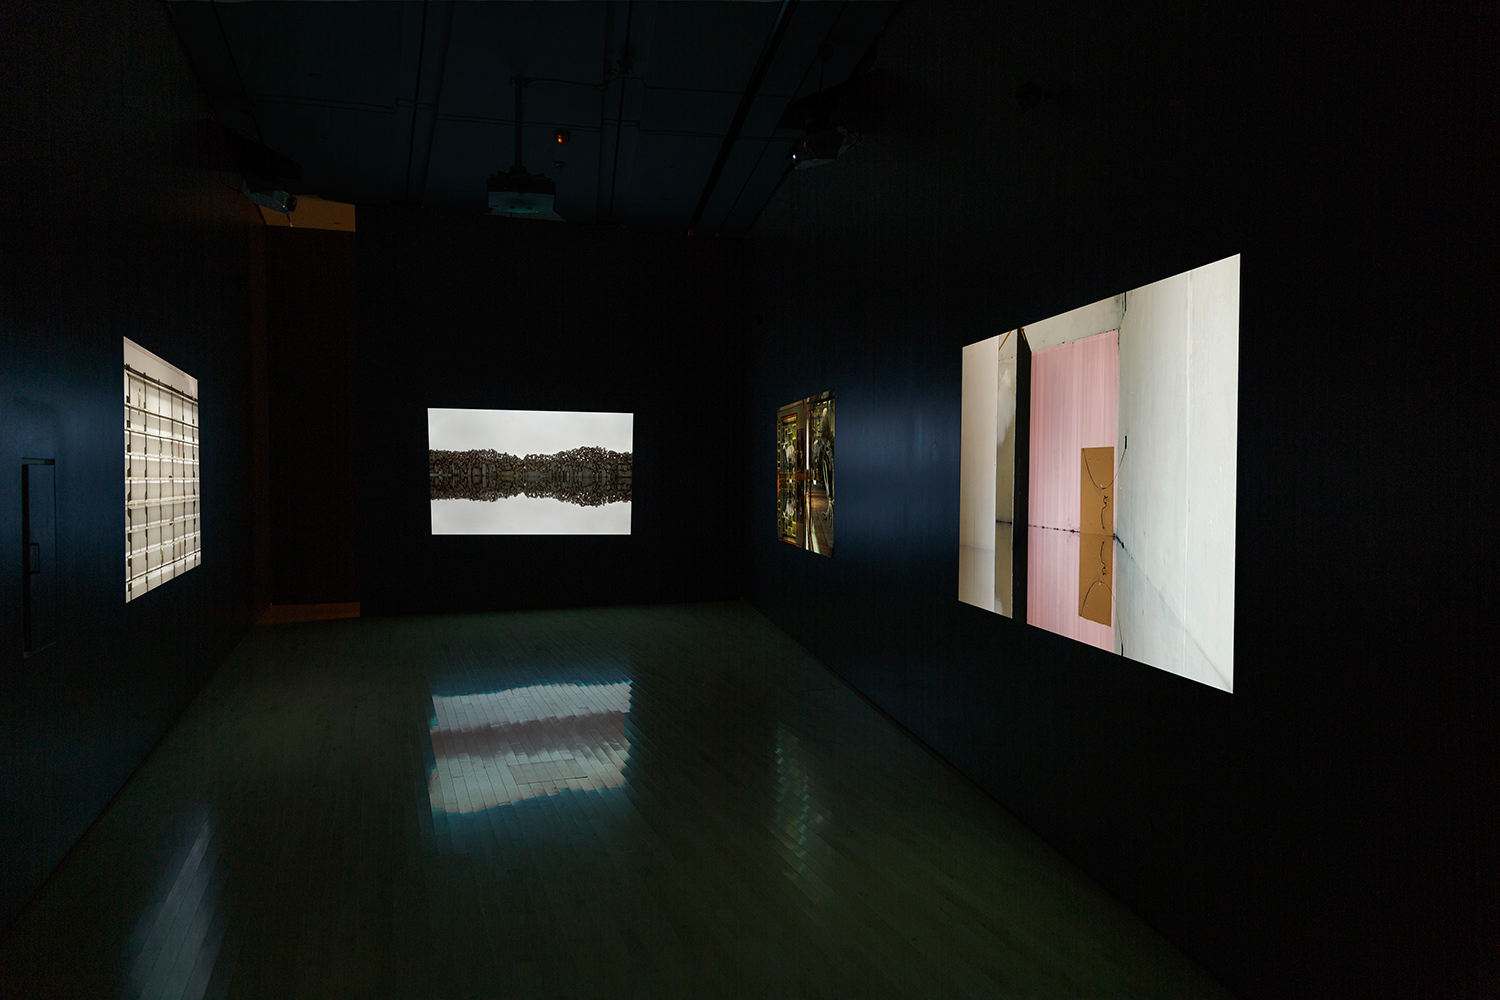 Ailbhe Ní Bhriain 'Reports to an Academy' installation view in '2116 – Forecast of the next century' at The Eli and Edythe Broad Art Museum at Michigan State University, USA, curated by Caitlín Doherty, Fiona Kearney and Chris Clarke.